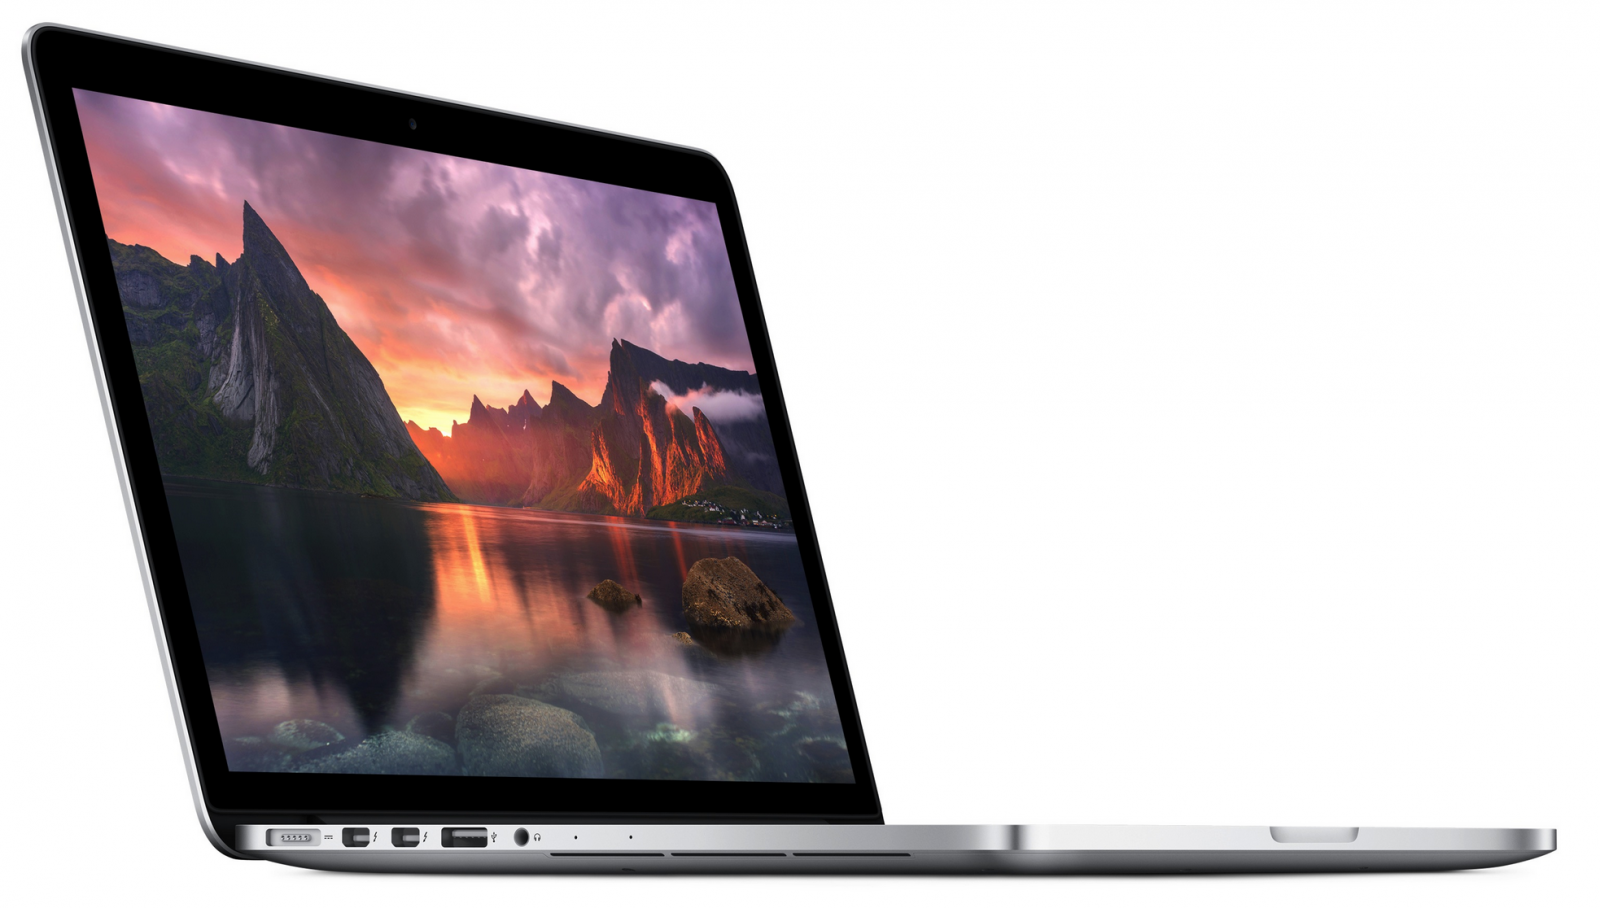 MacBook Pro 2015 with Force Touch trackpad review - The best just got better